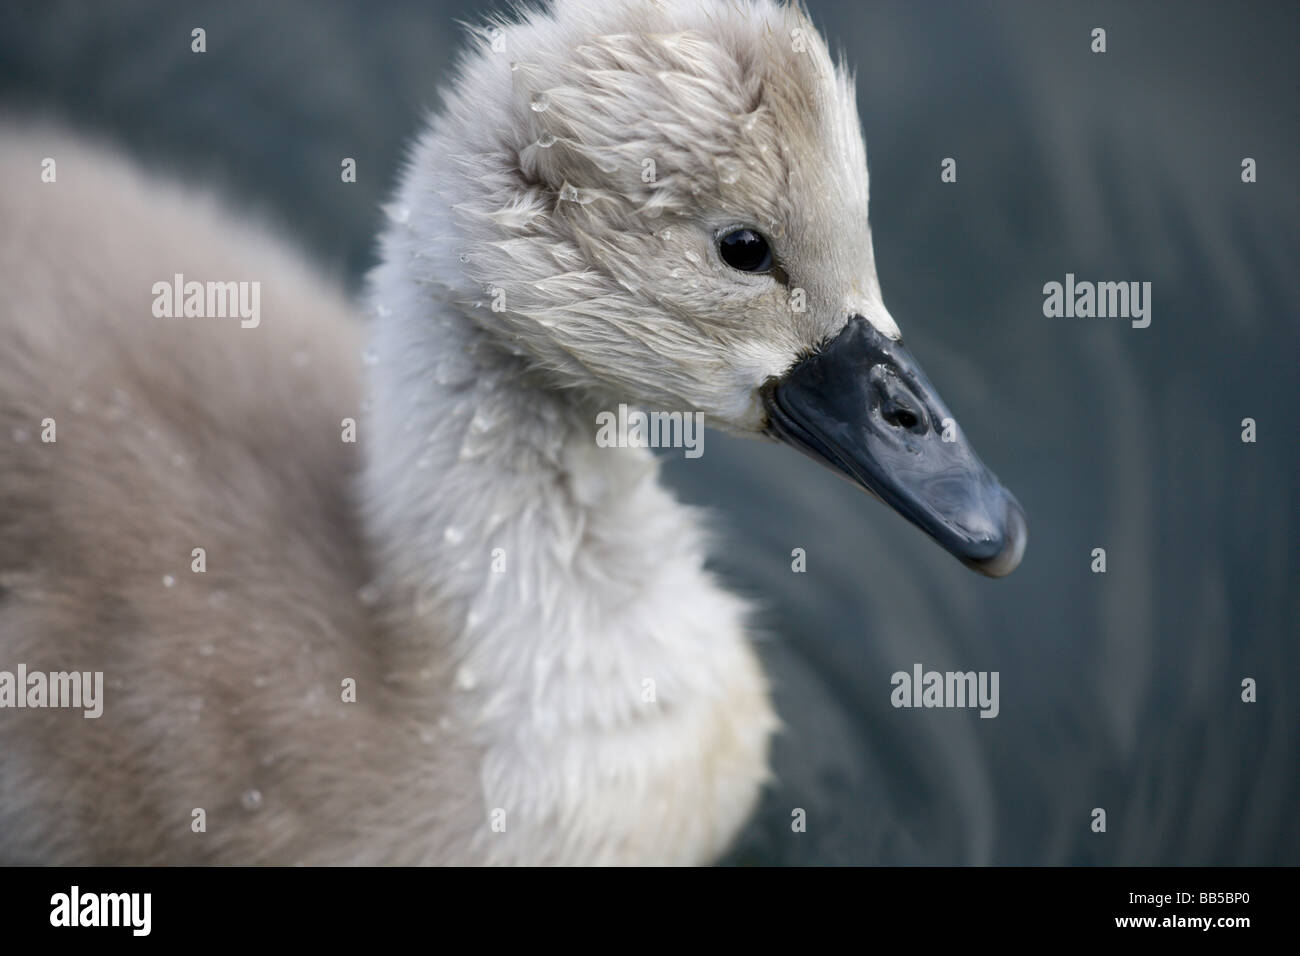 Profile of a Mute Swan cygnet (Cygnus olor) looking to the right Stock Photo